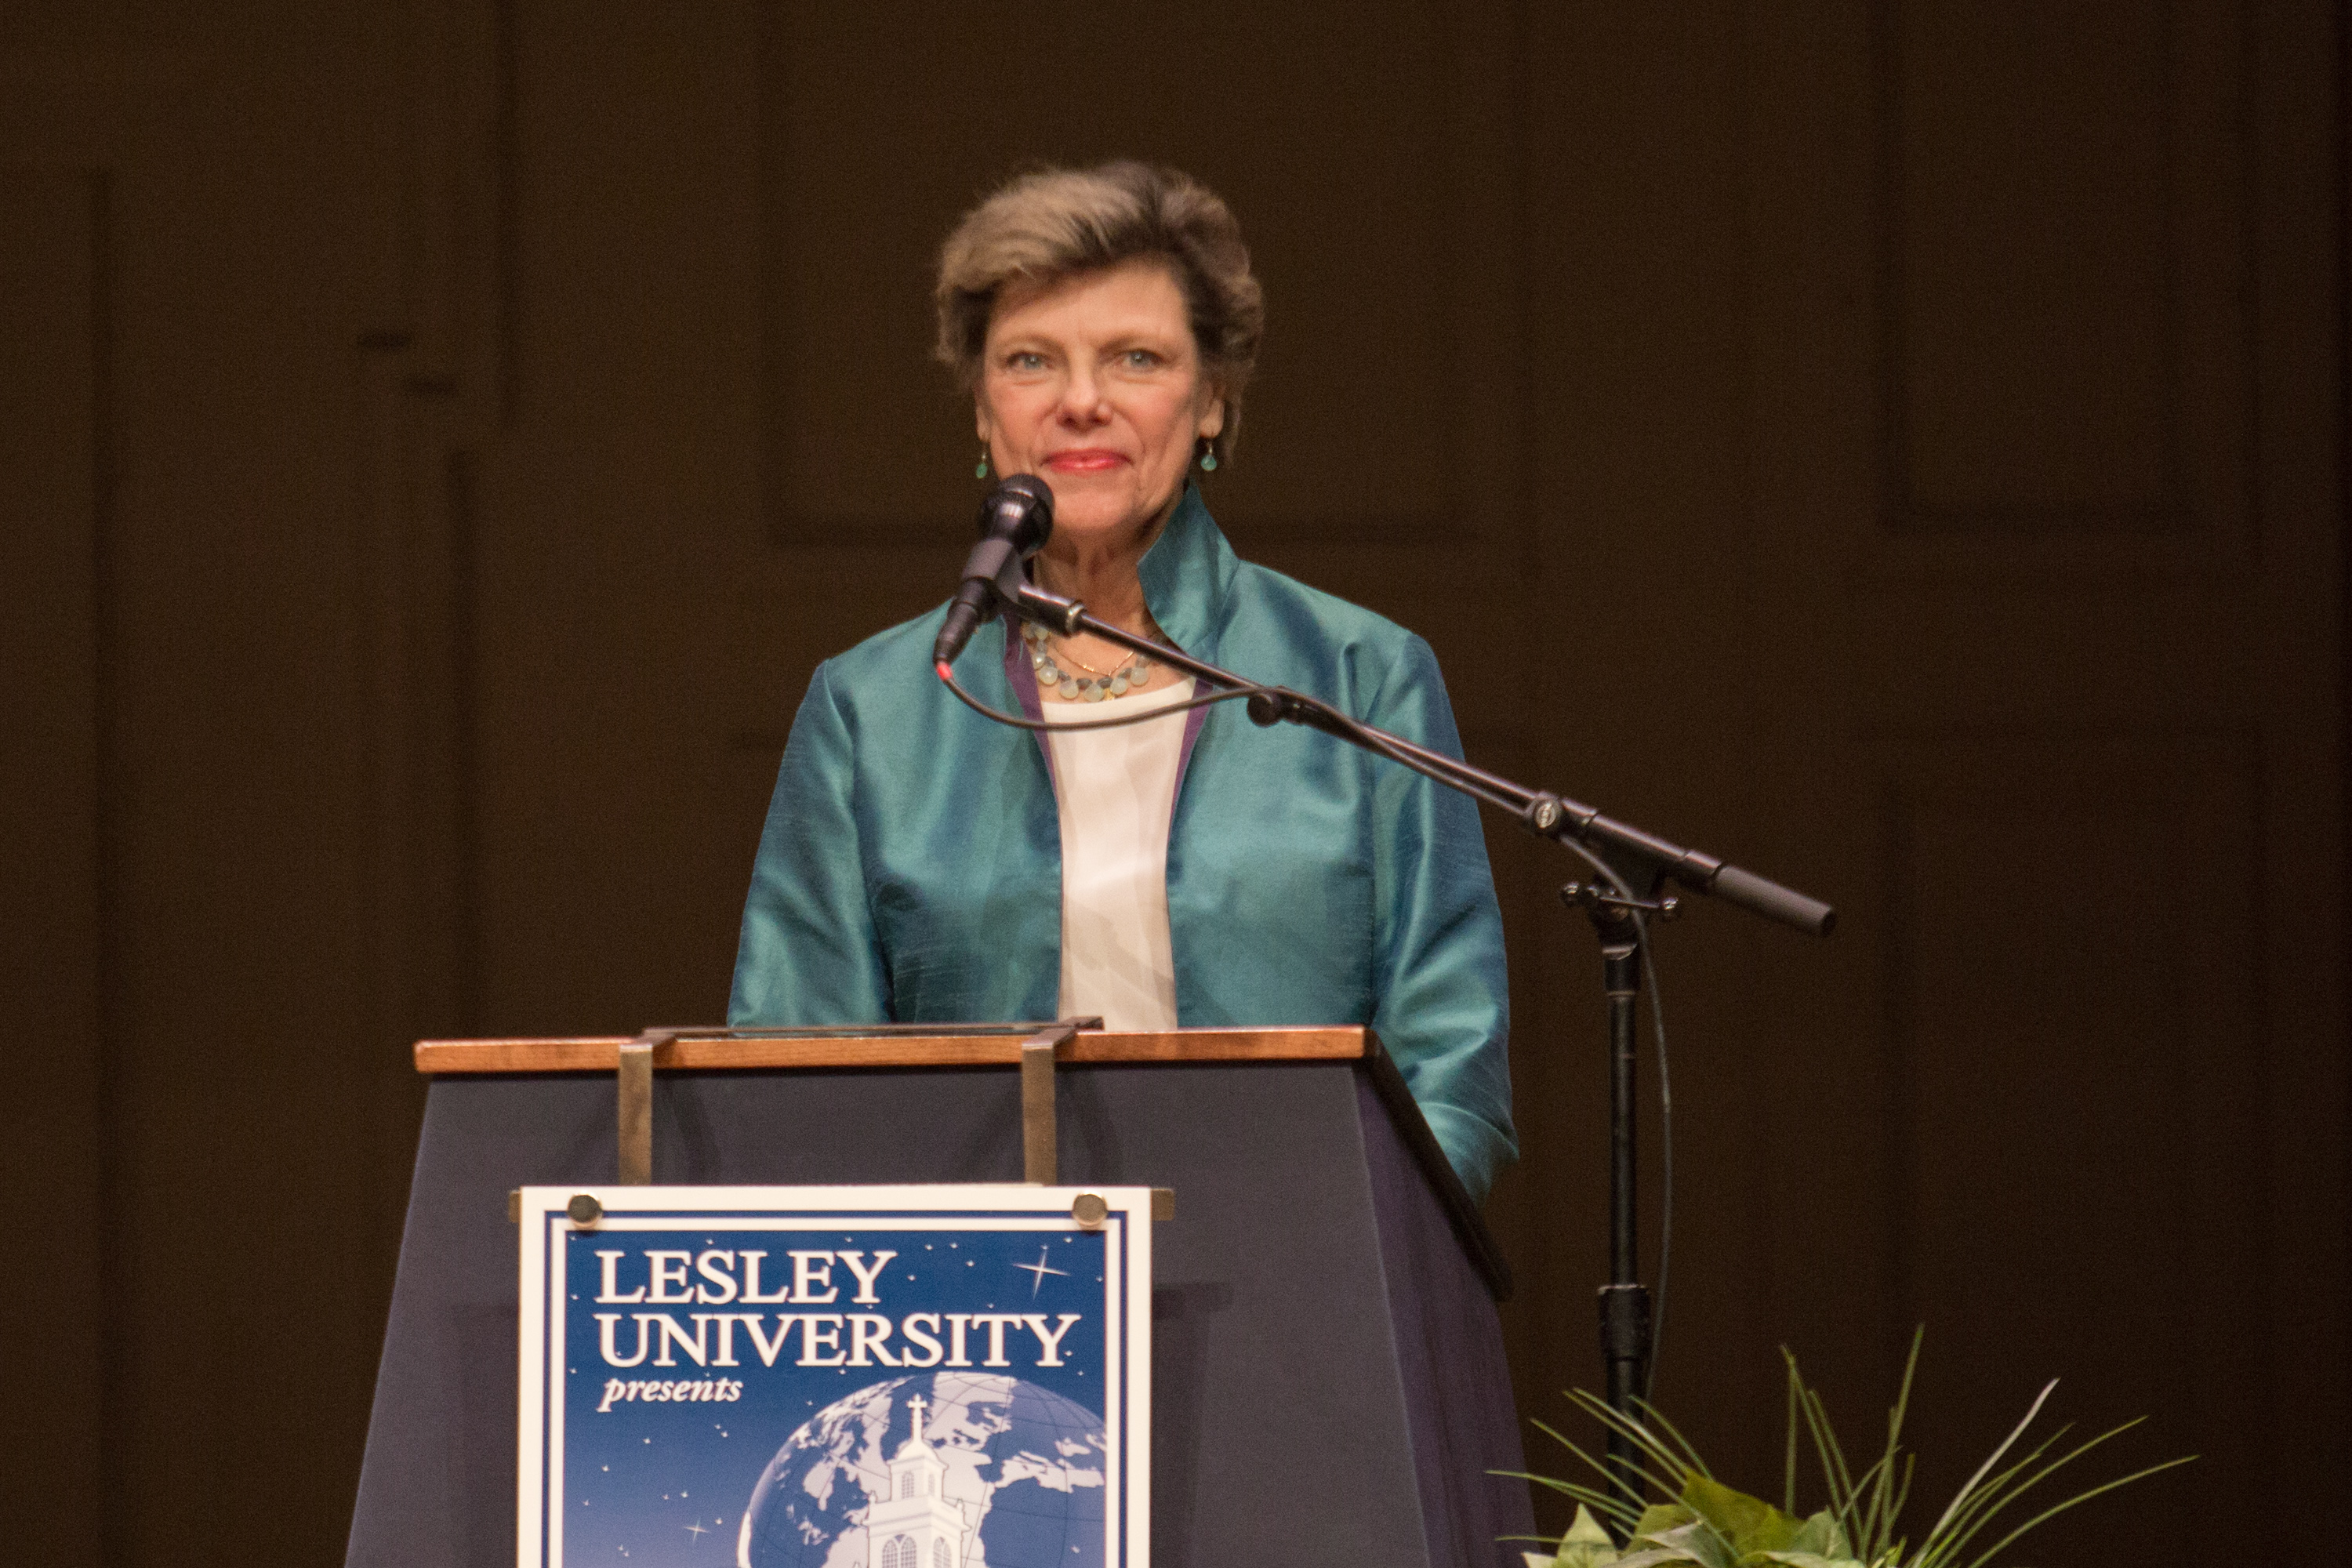 Cokie Roberts stands on stage behind the podium.